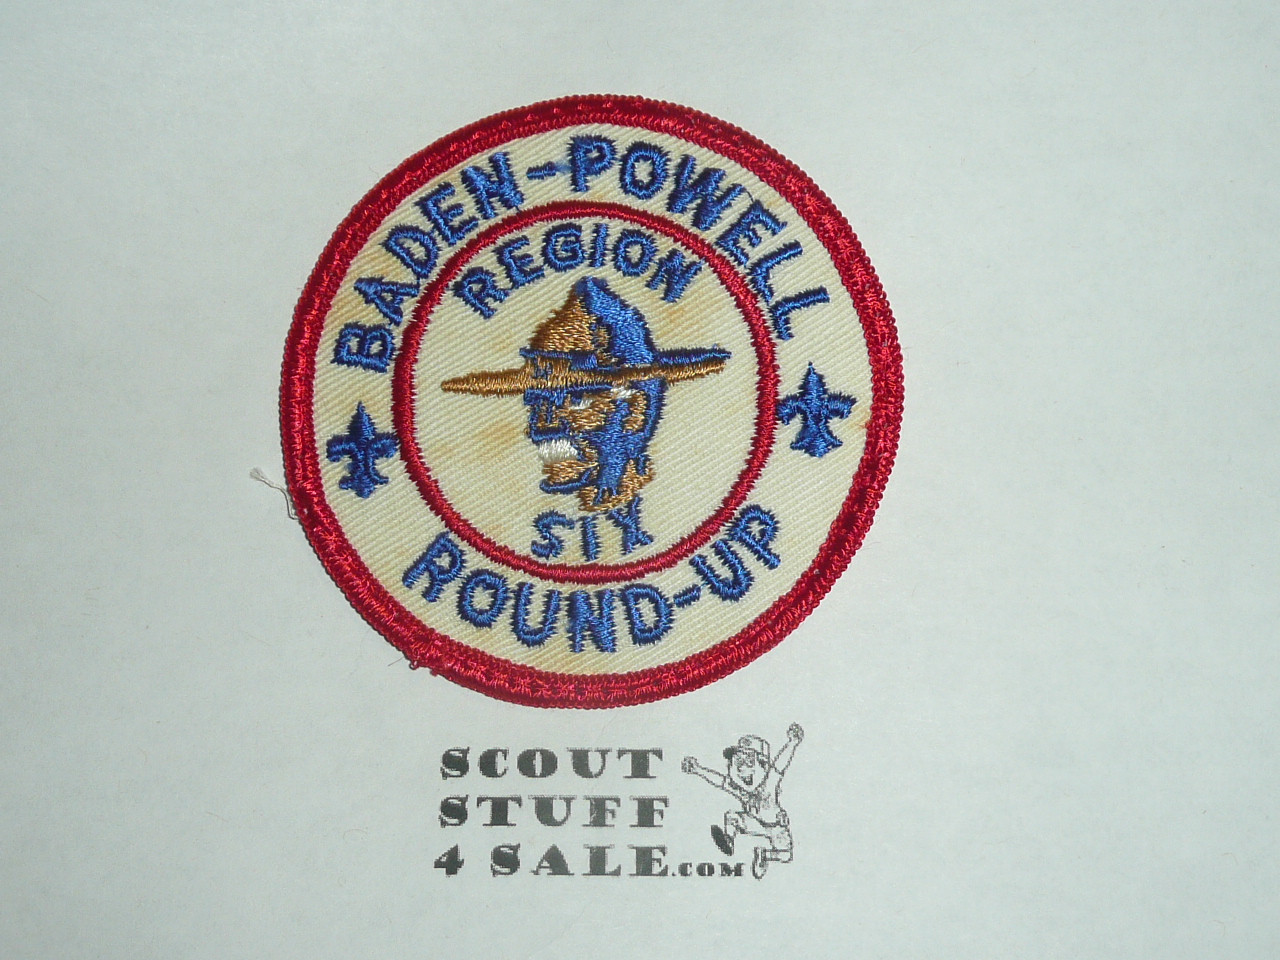 Region 6 Baden Powell Round-up Patch, sewn